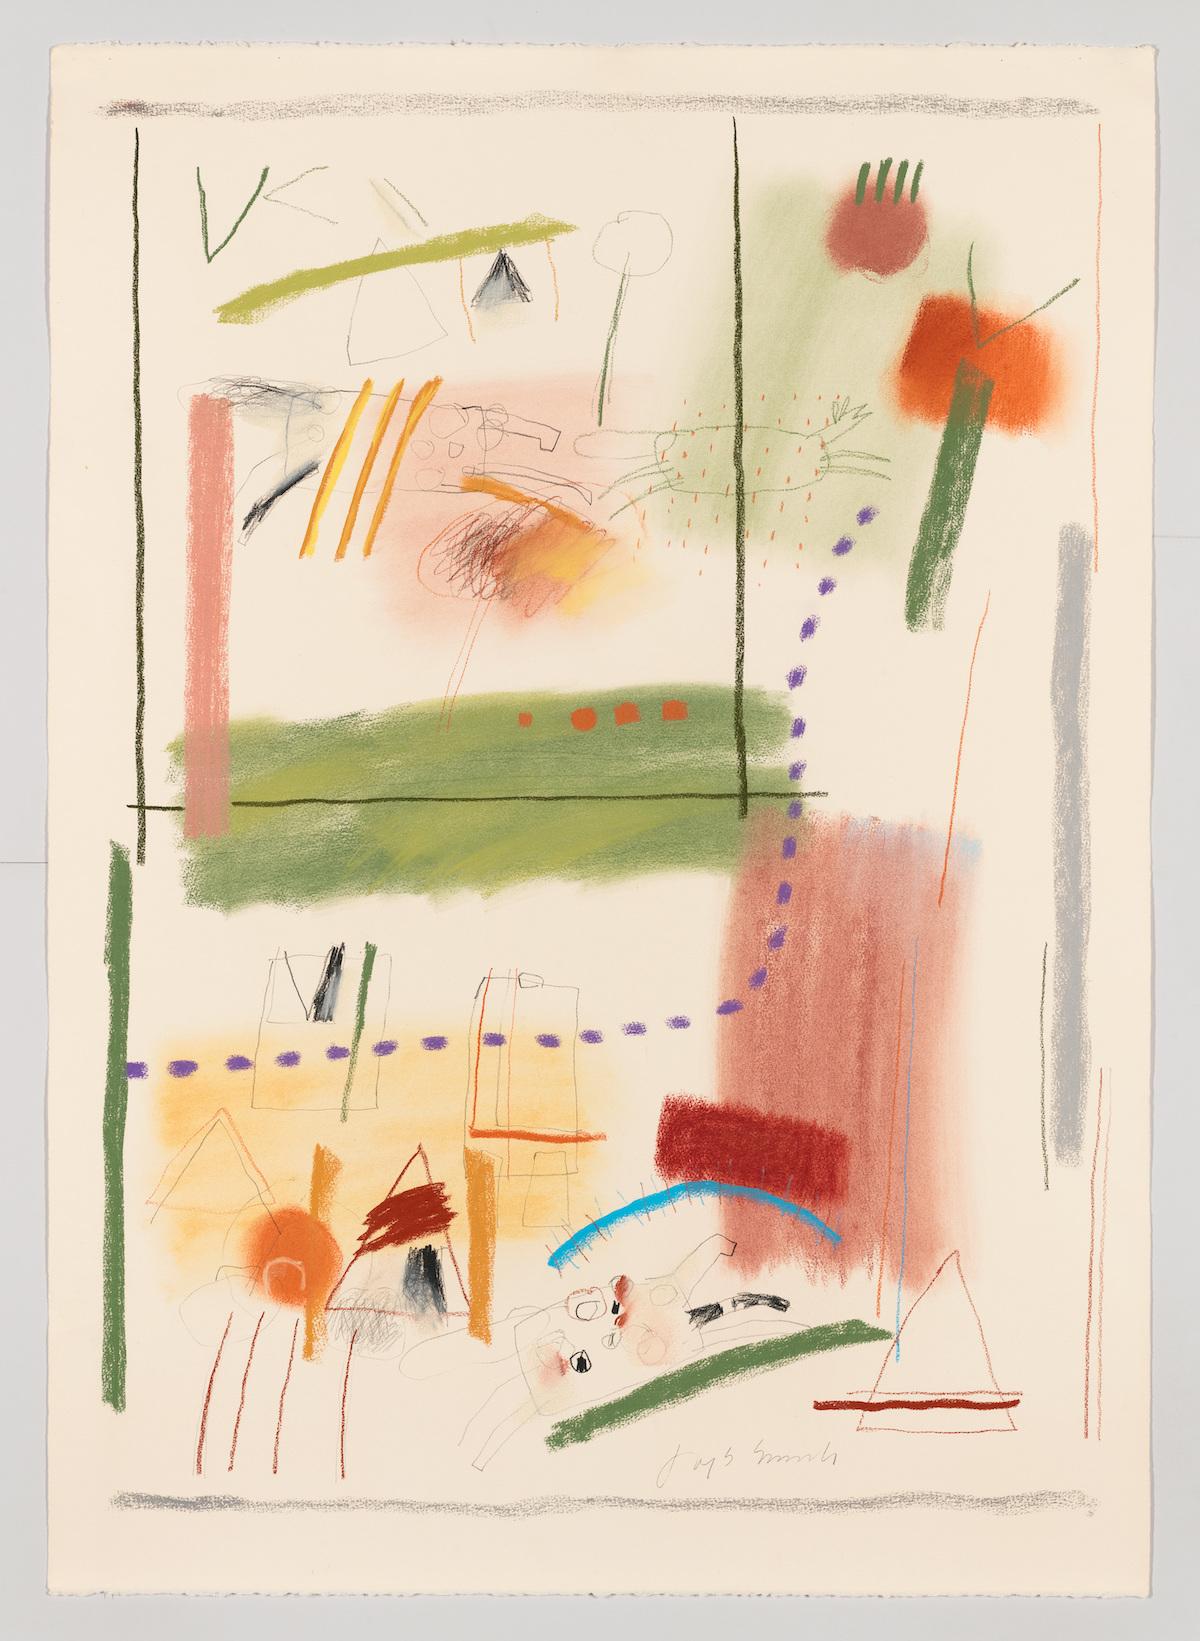 Jaune Quick-to-See Smith, Kalispell #1, 1979. Pastel and charcoal on paper, 41 3/4 × 29 5/8 in. (106 × 75.2 cm). Whitney Museum of American Art, New York; gift of Altria Group, Inc. 2008.137. © Jaune Quick-to-See Smith